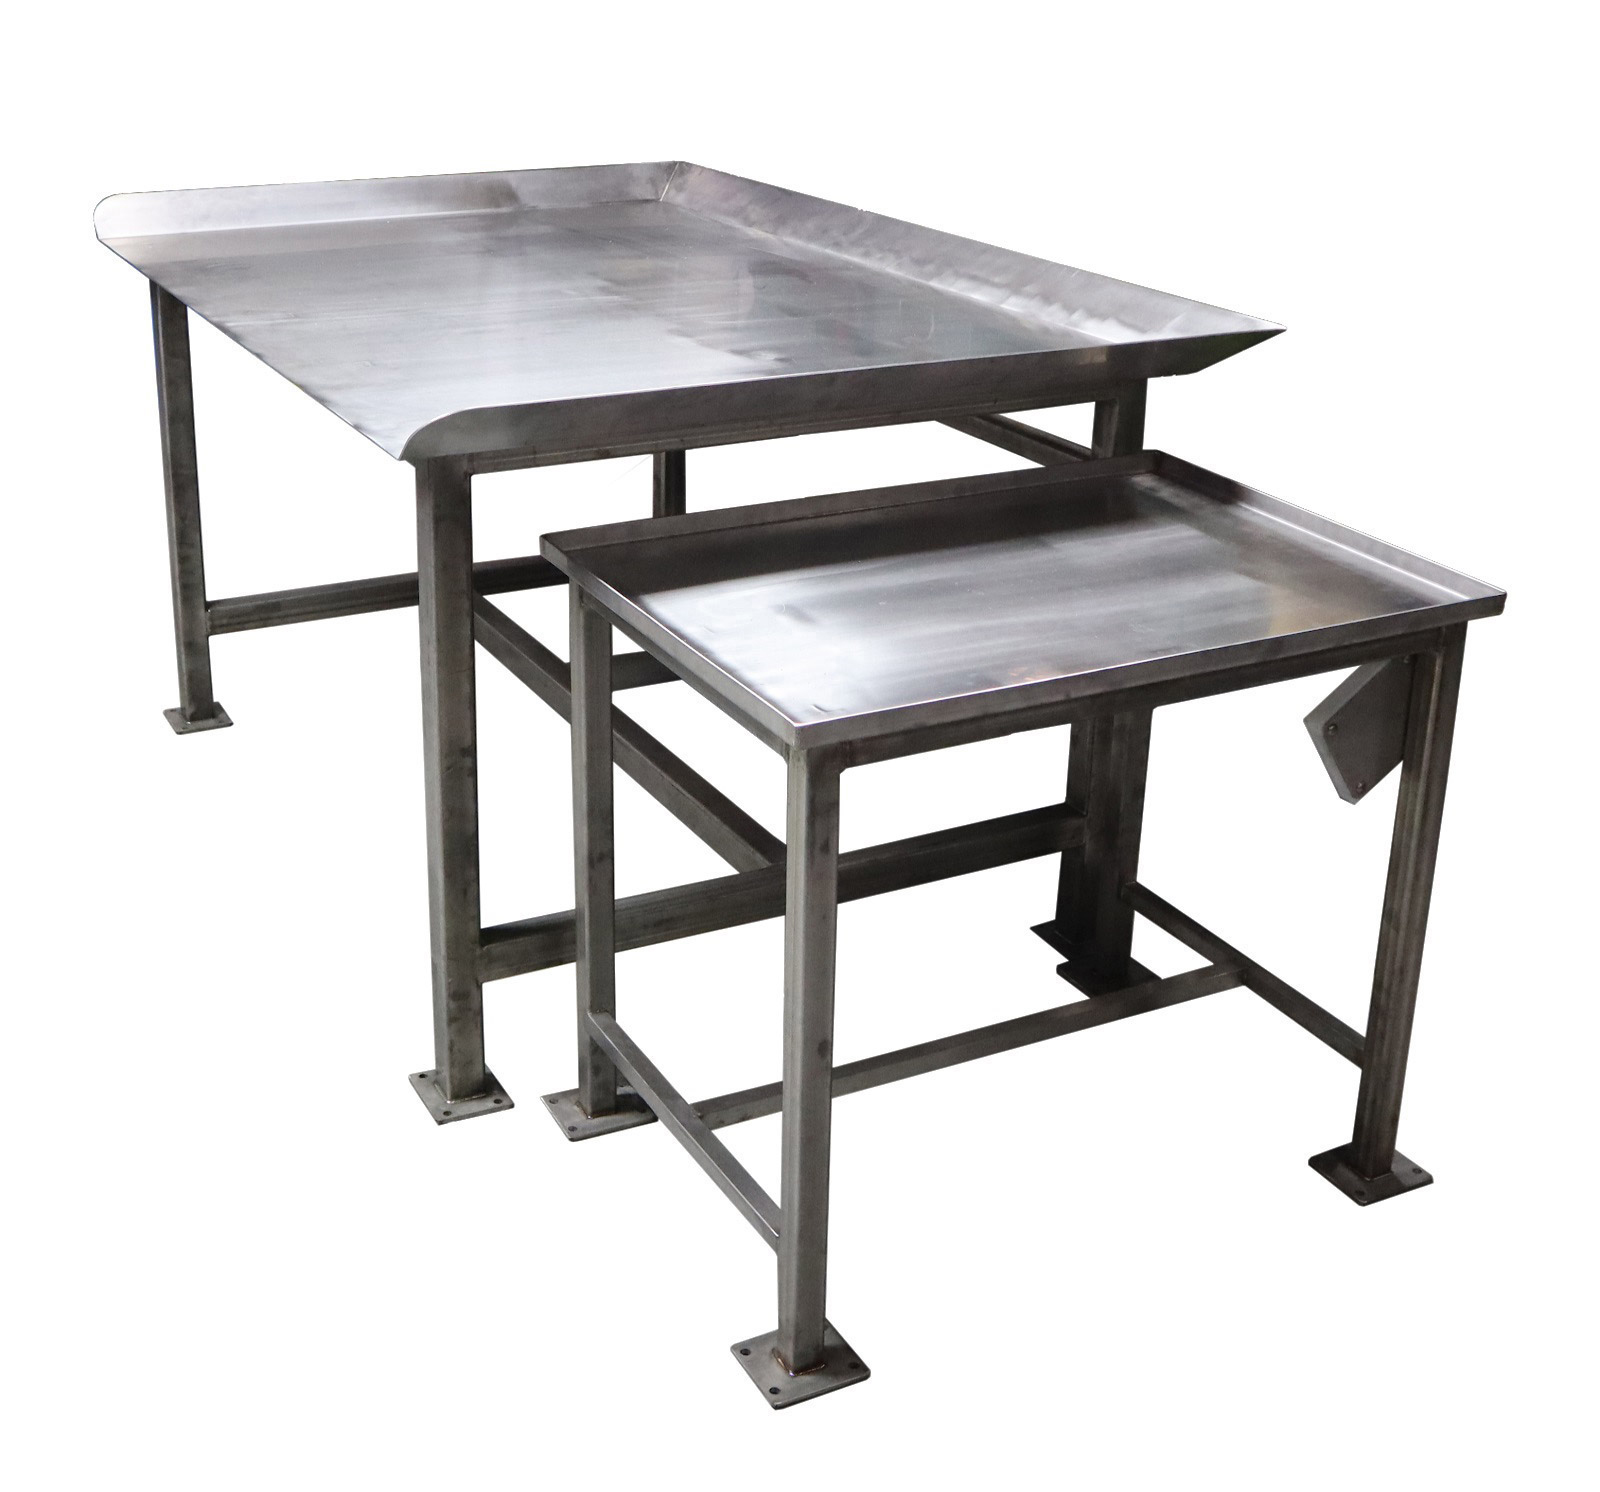 Stainless prep table